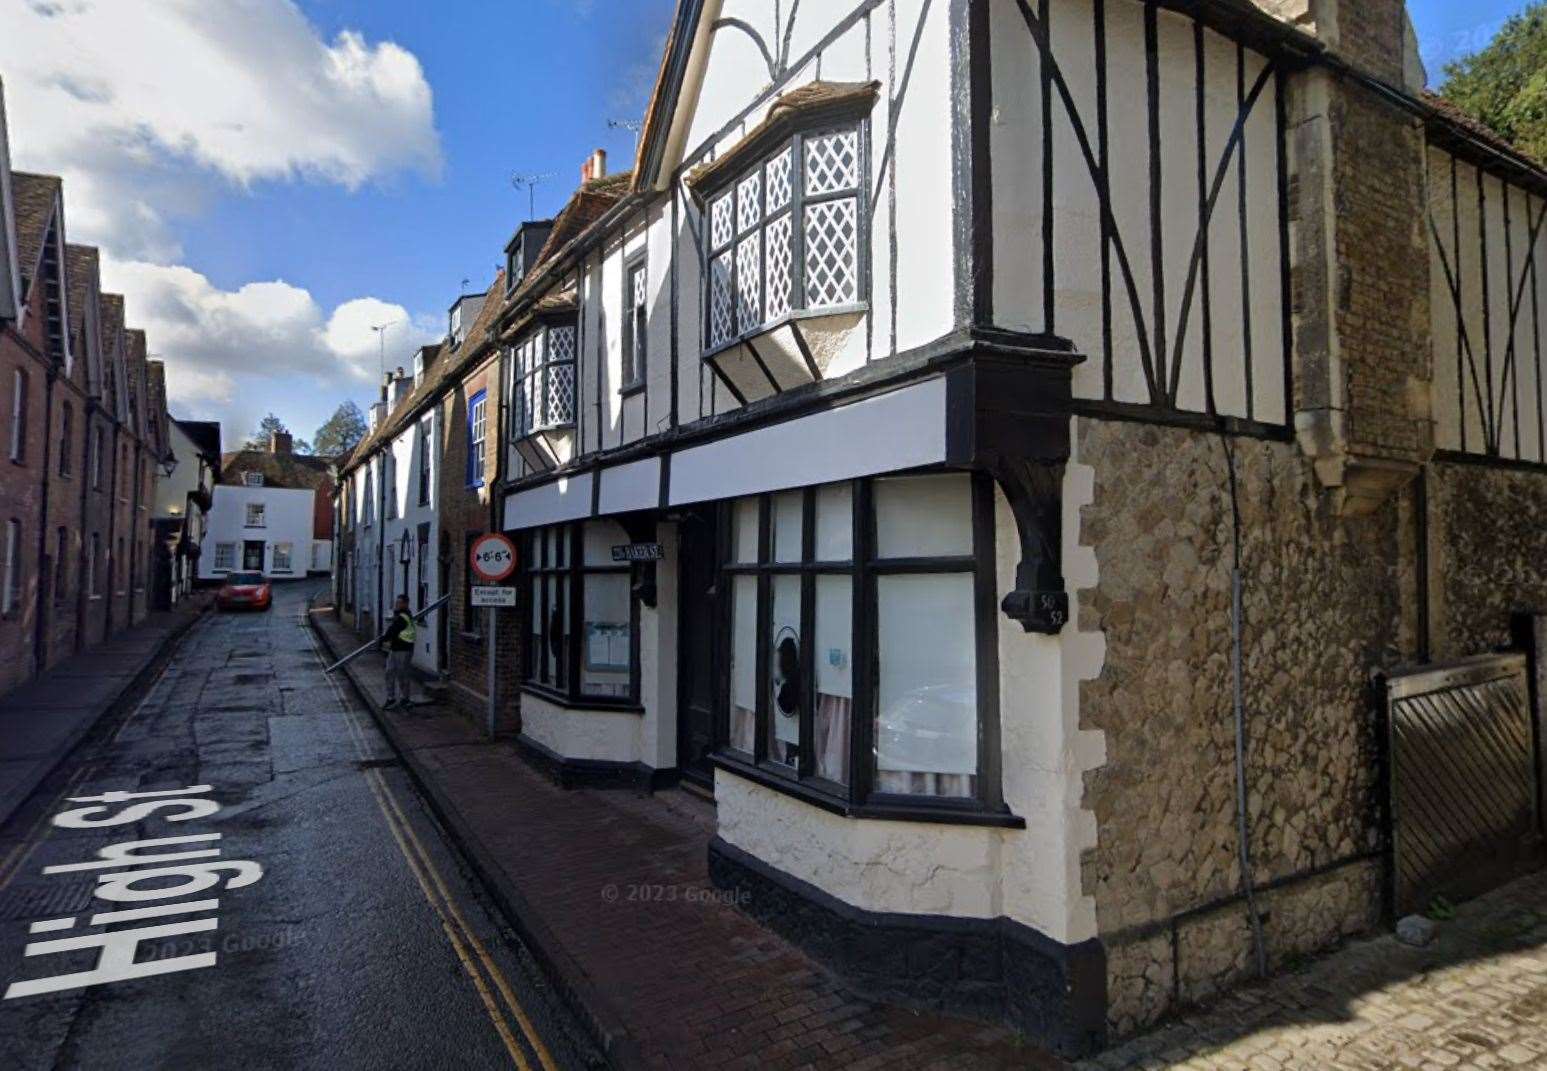 Sherlock's in Aylesford High Street may be turned into a residential home. Picture: Google